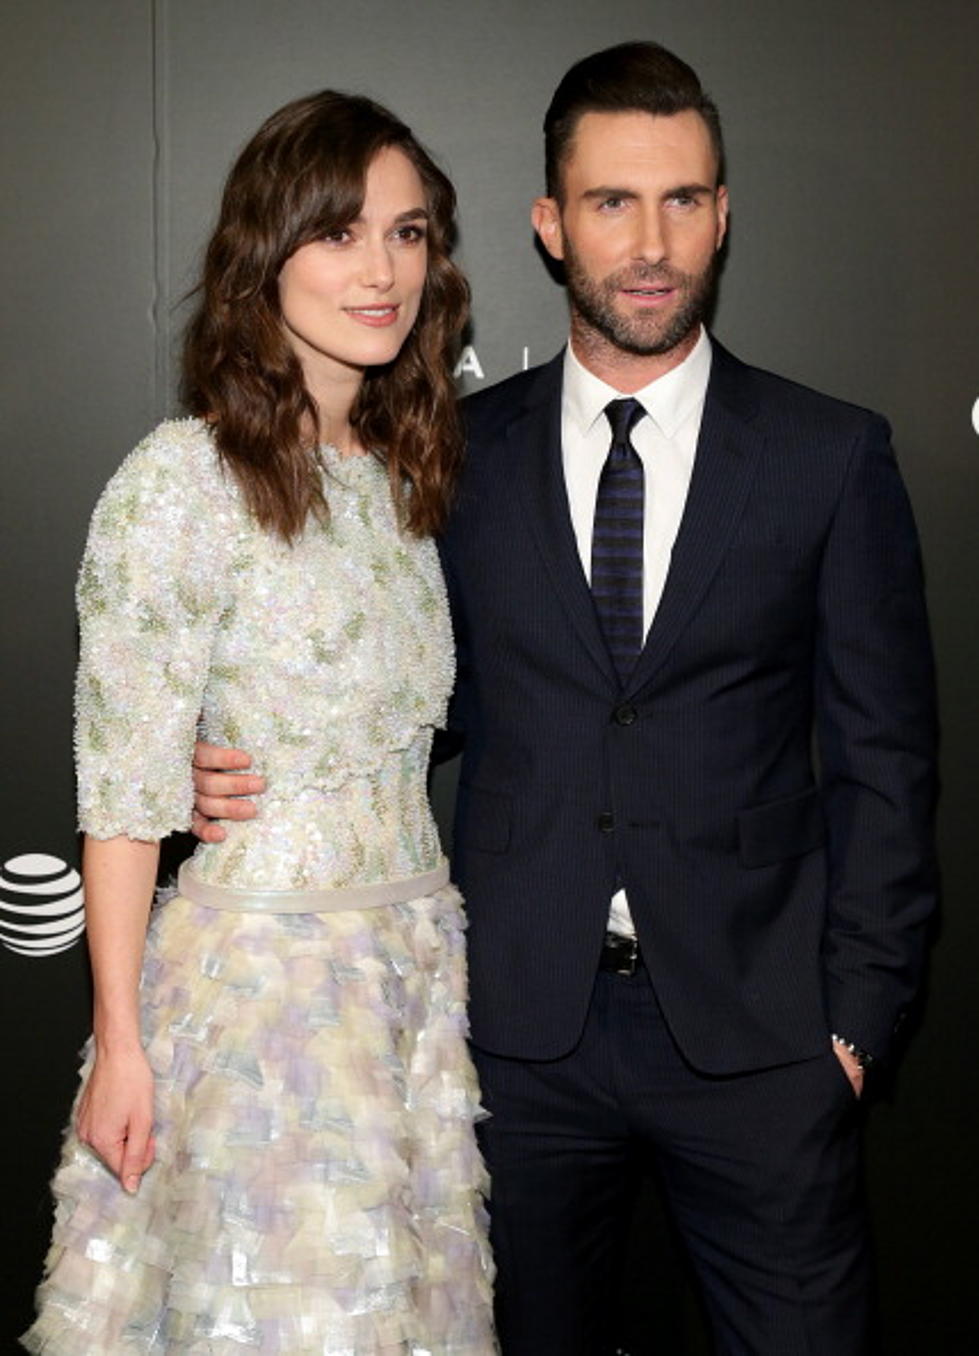 Keira Knightly On Adam Levine, ‘He Plays A D–khead Well’ [VIDEO]